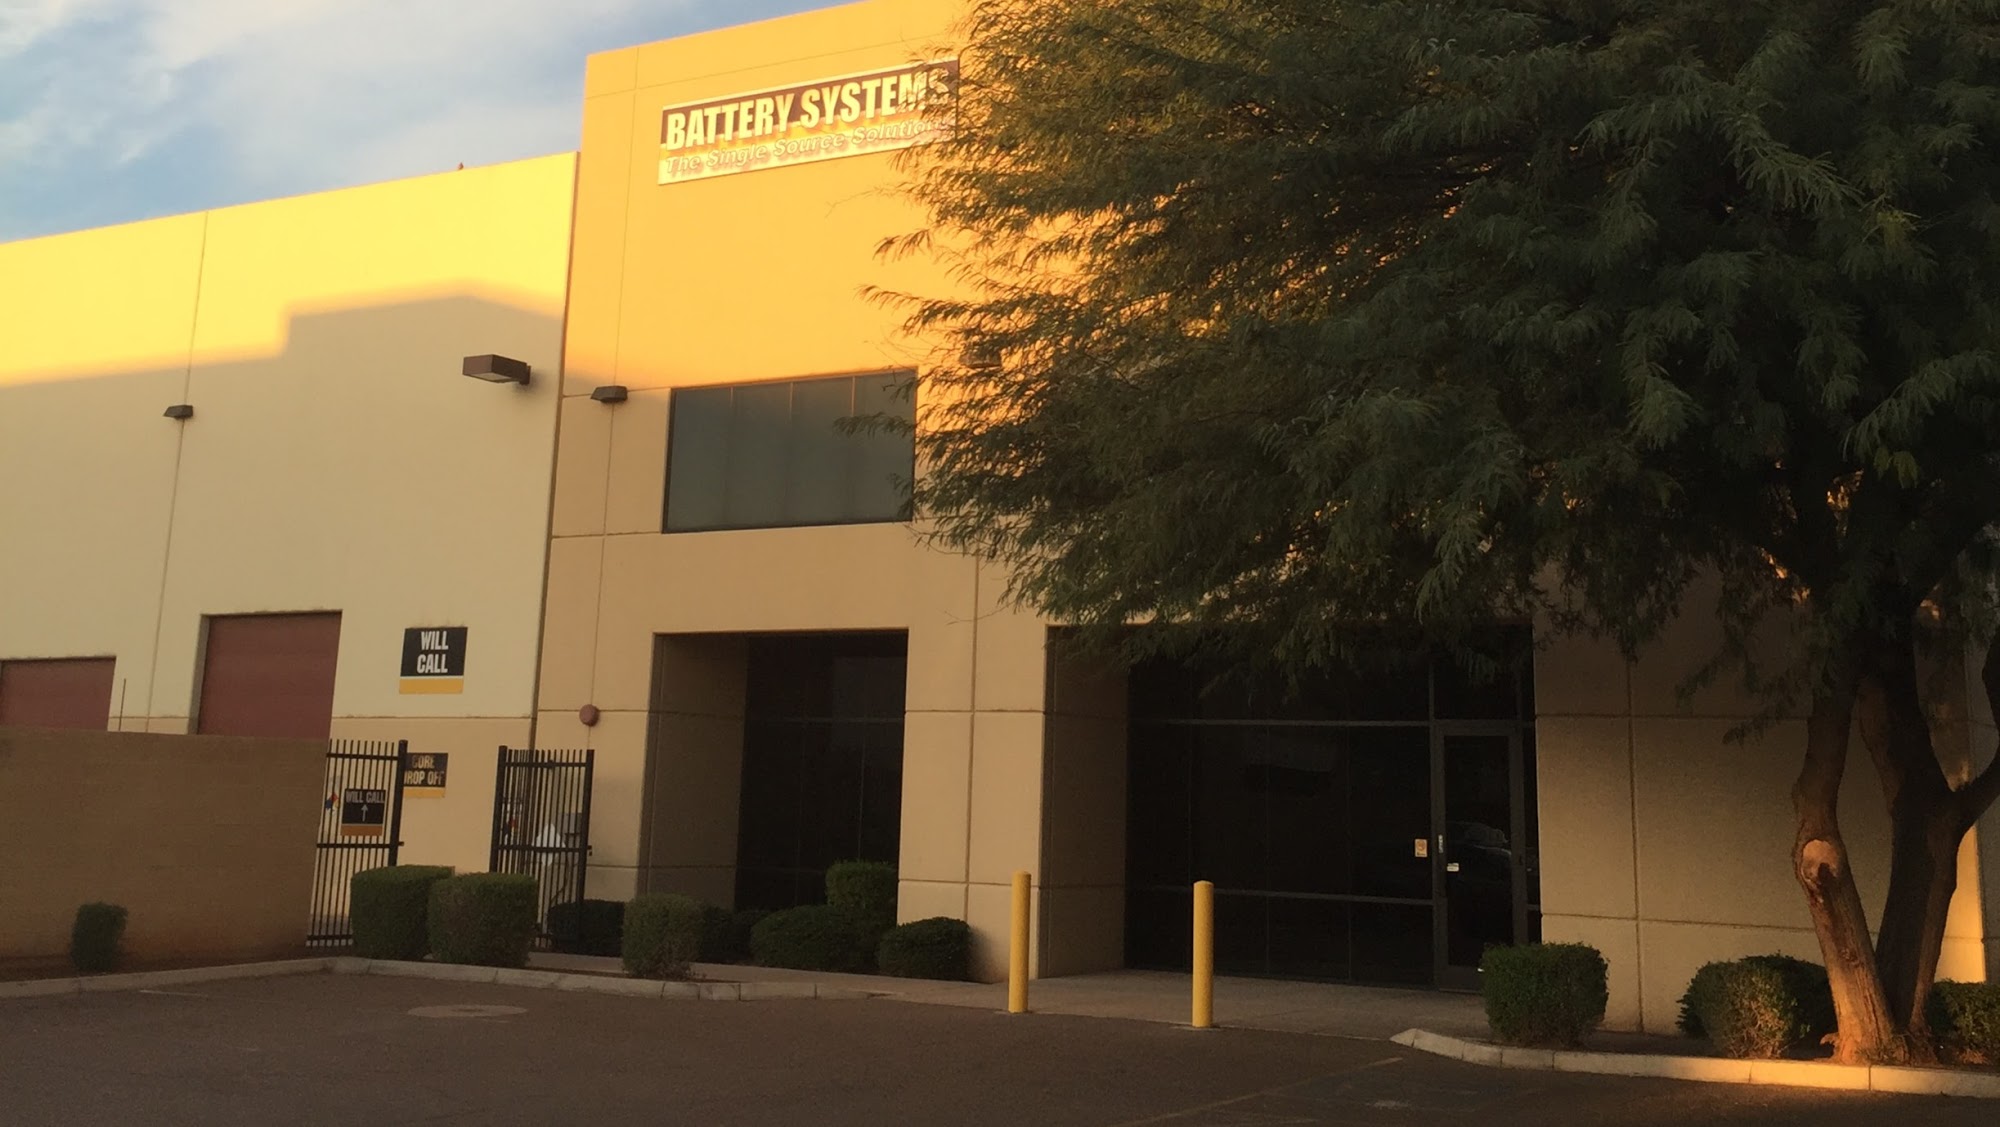 Continental Battery Systems of Phoenix